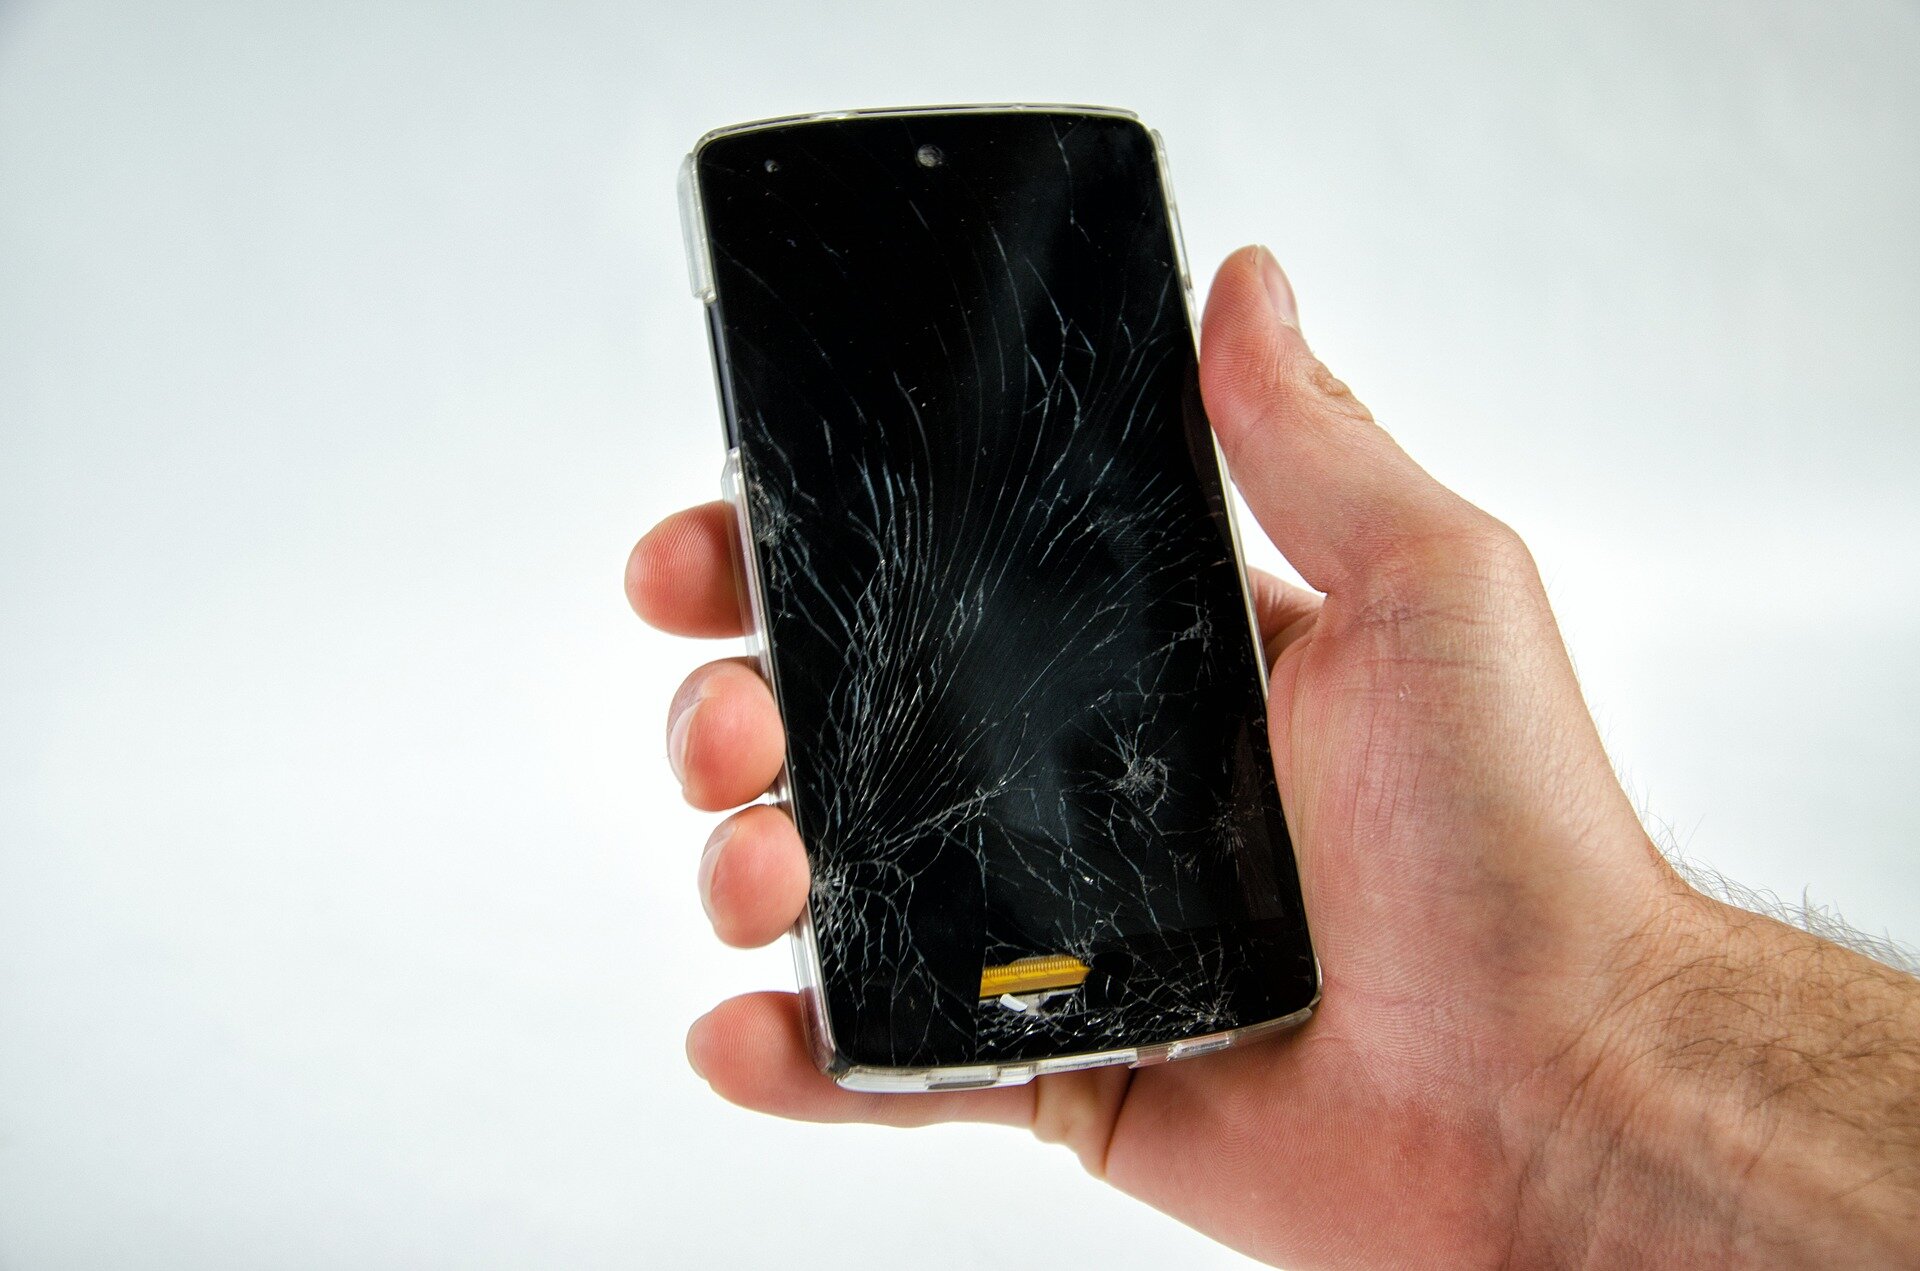 Researchers develop self-healing polymers for cracked cellphone screens